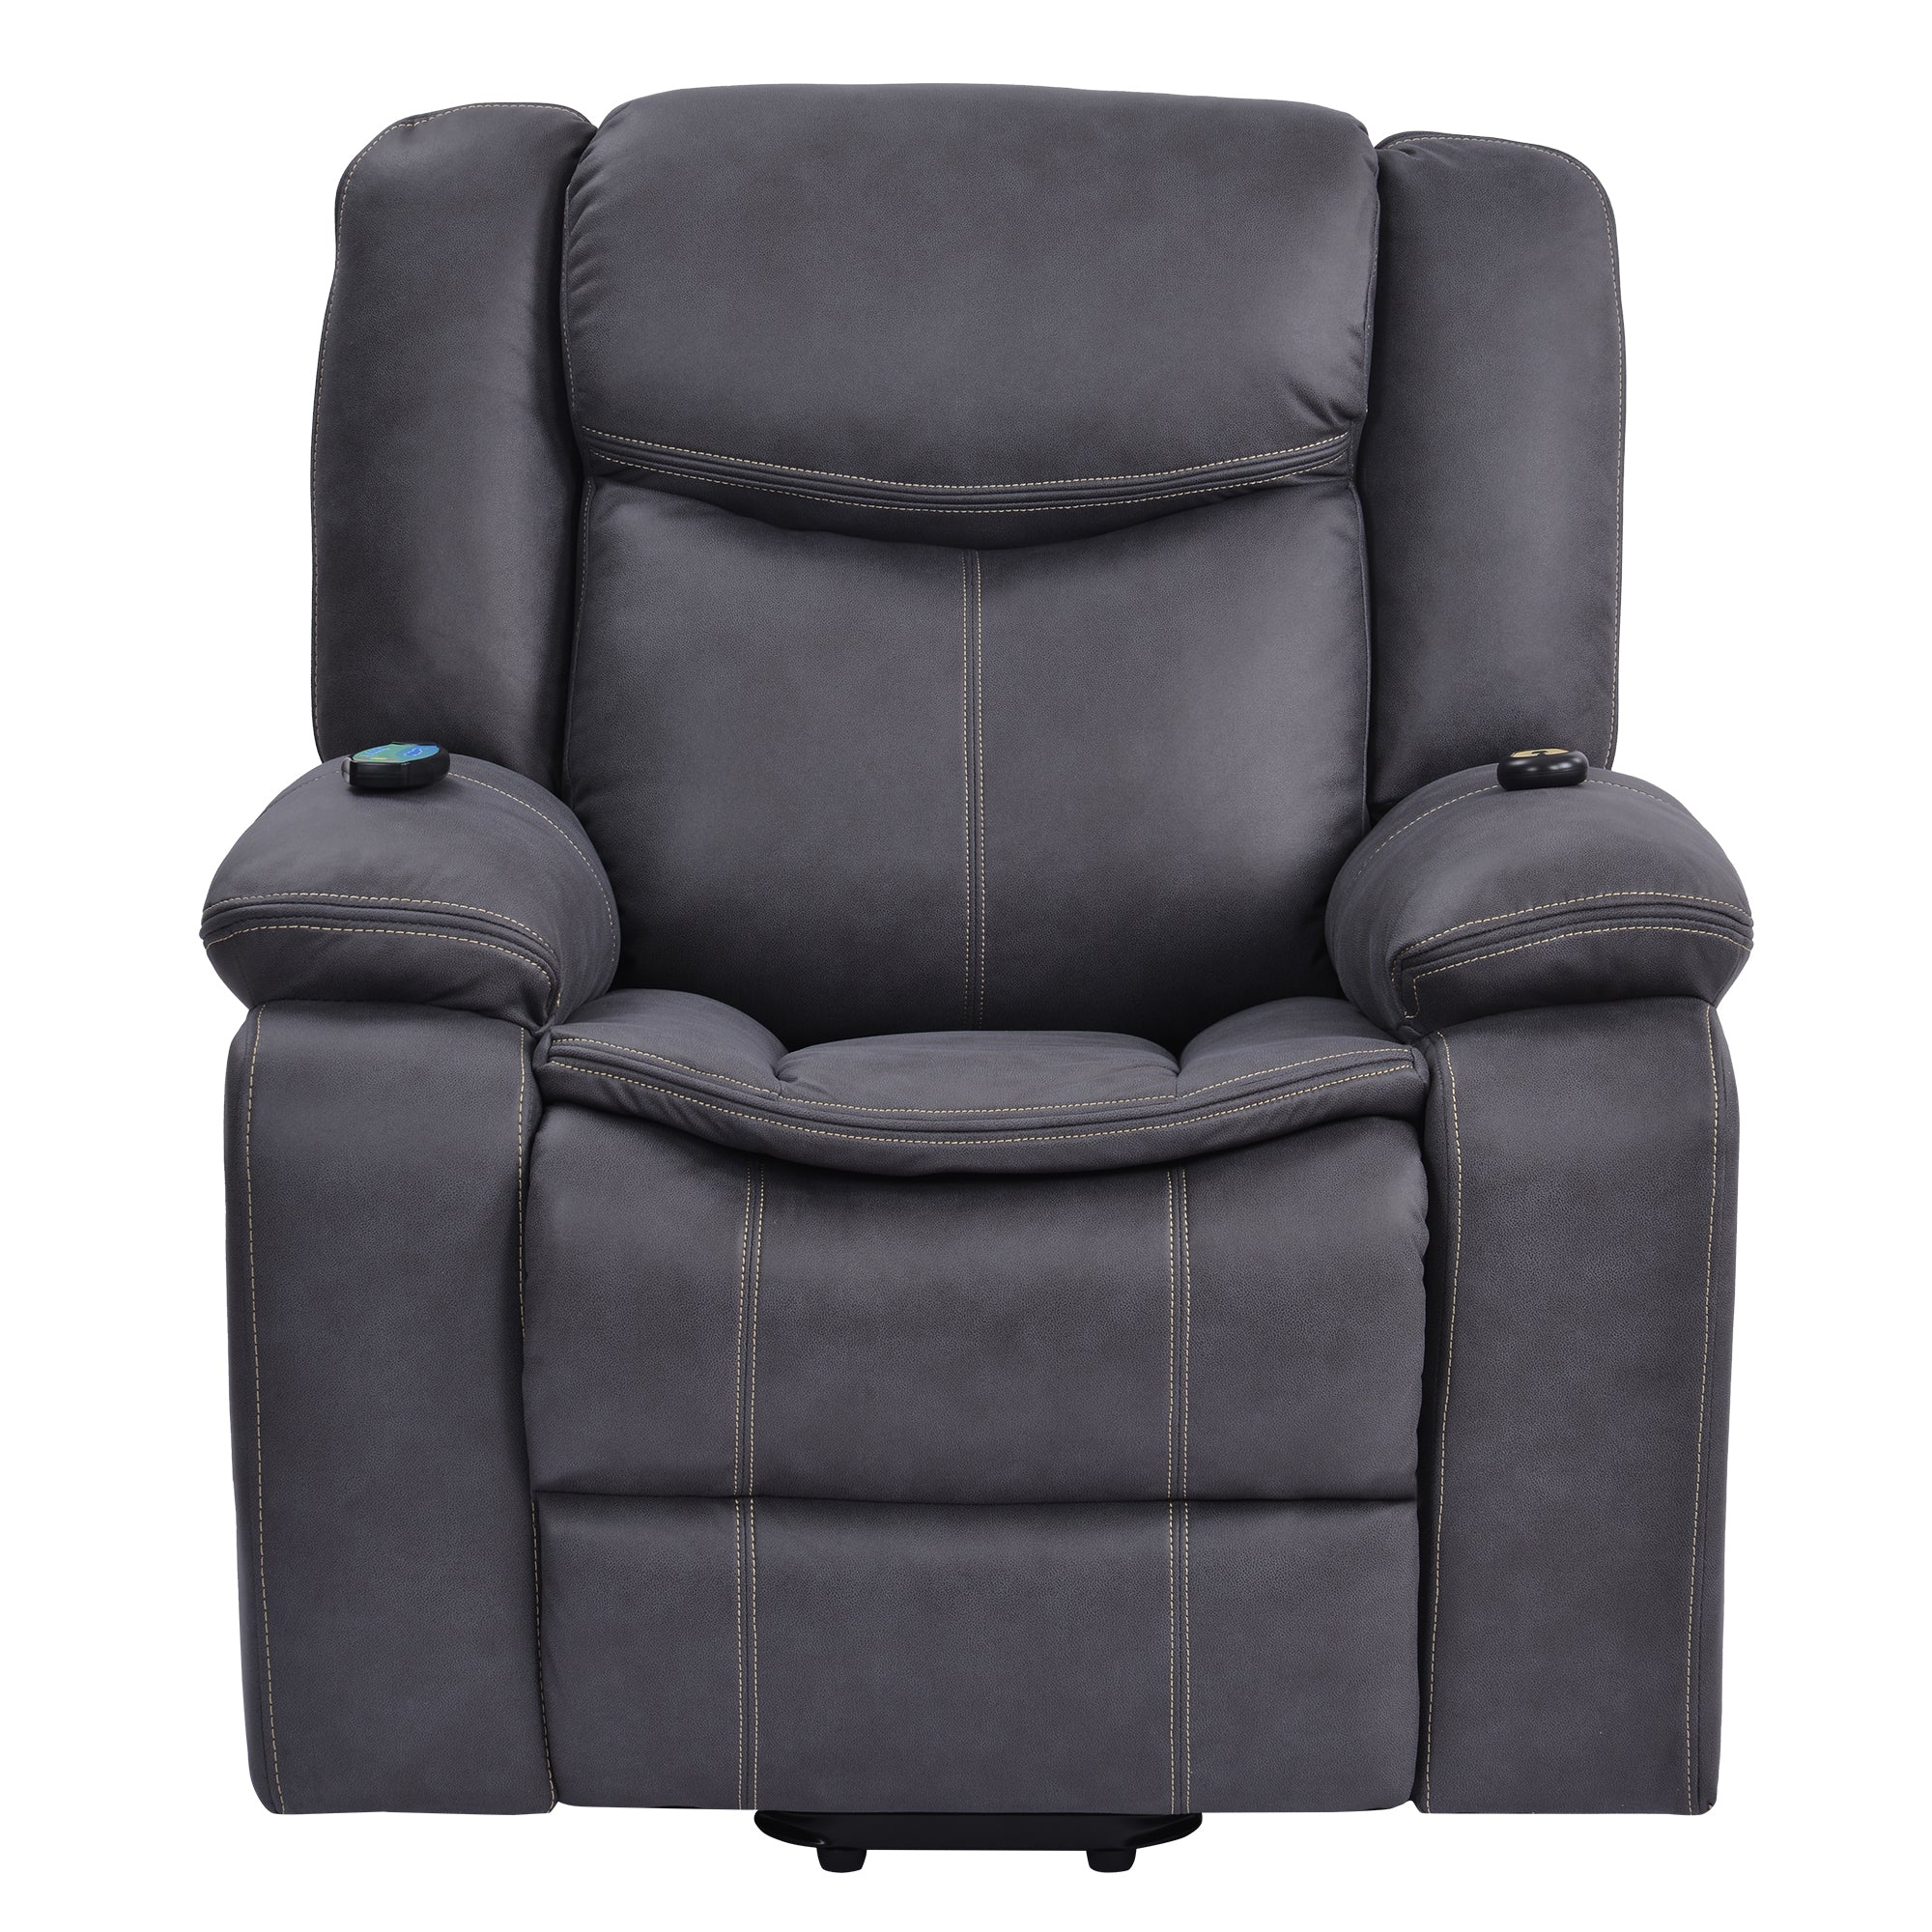 Power Lift Recliner Chair with Heat and Massage, front view seated